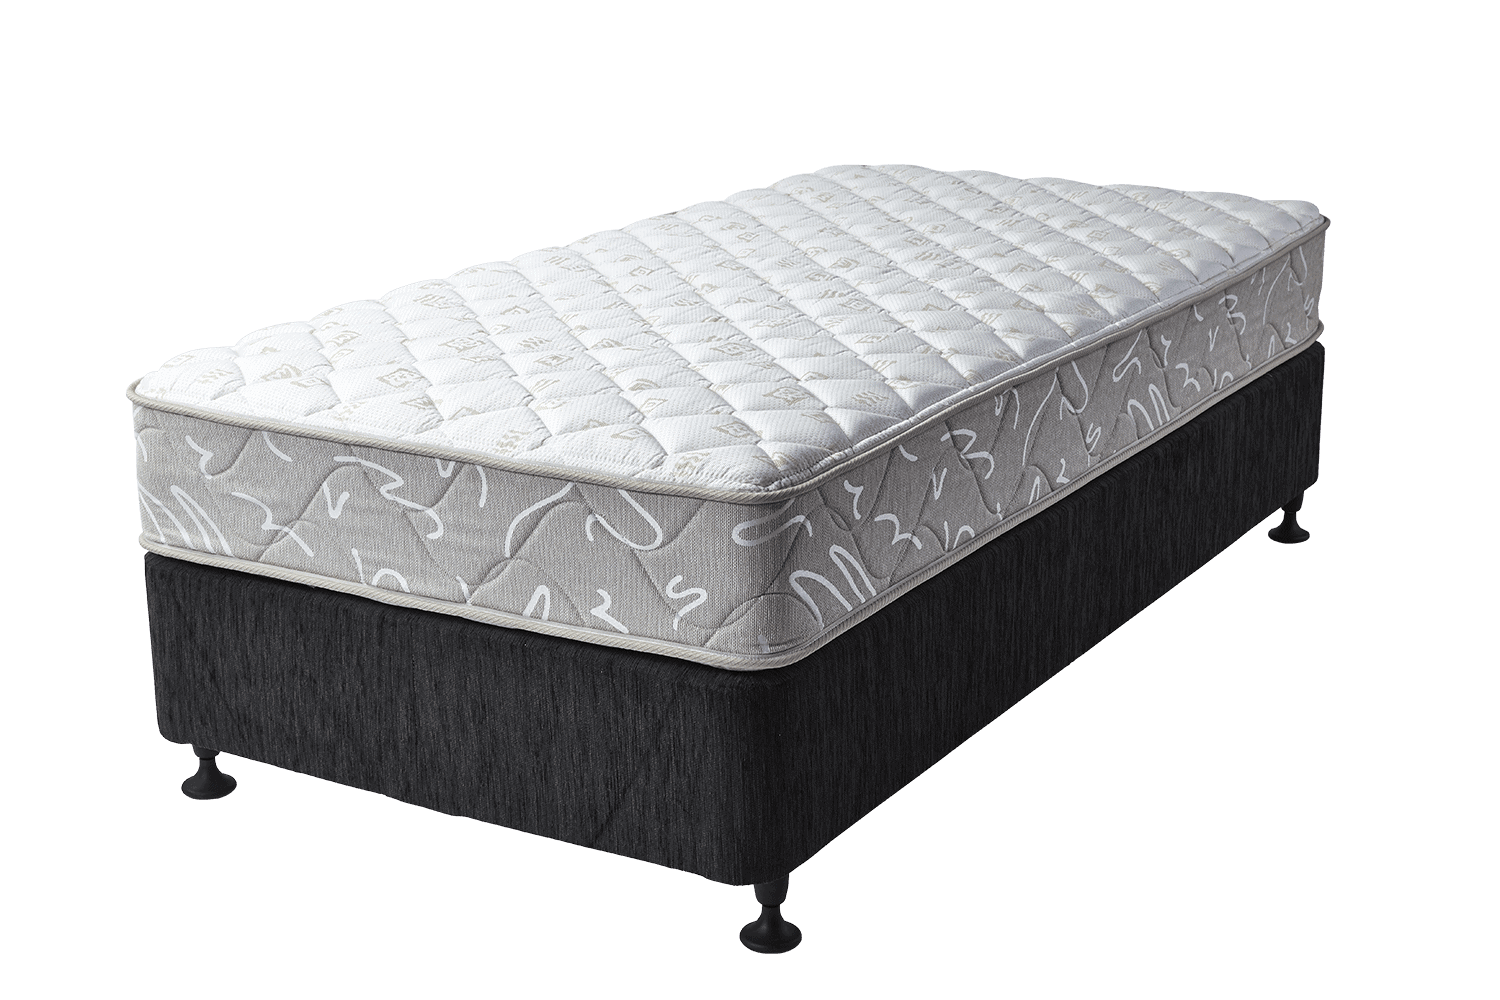 mattresses for sale in kitchener